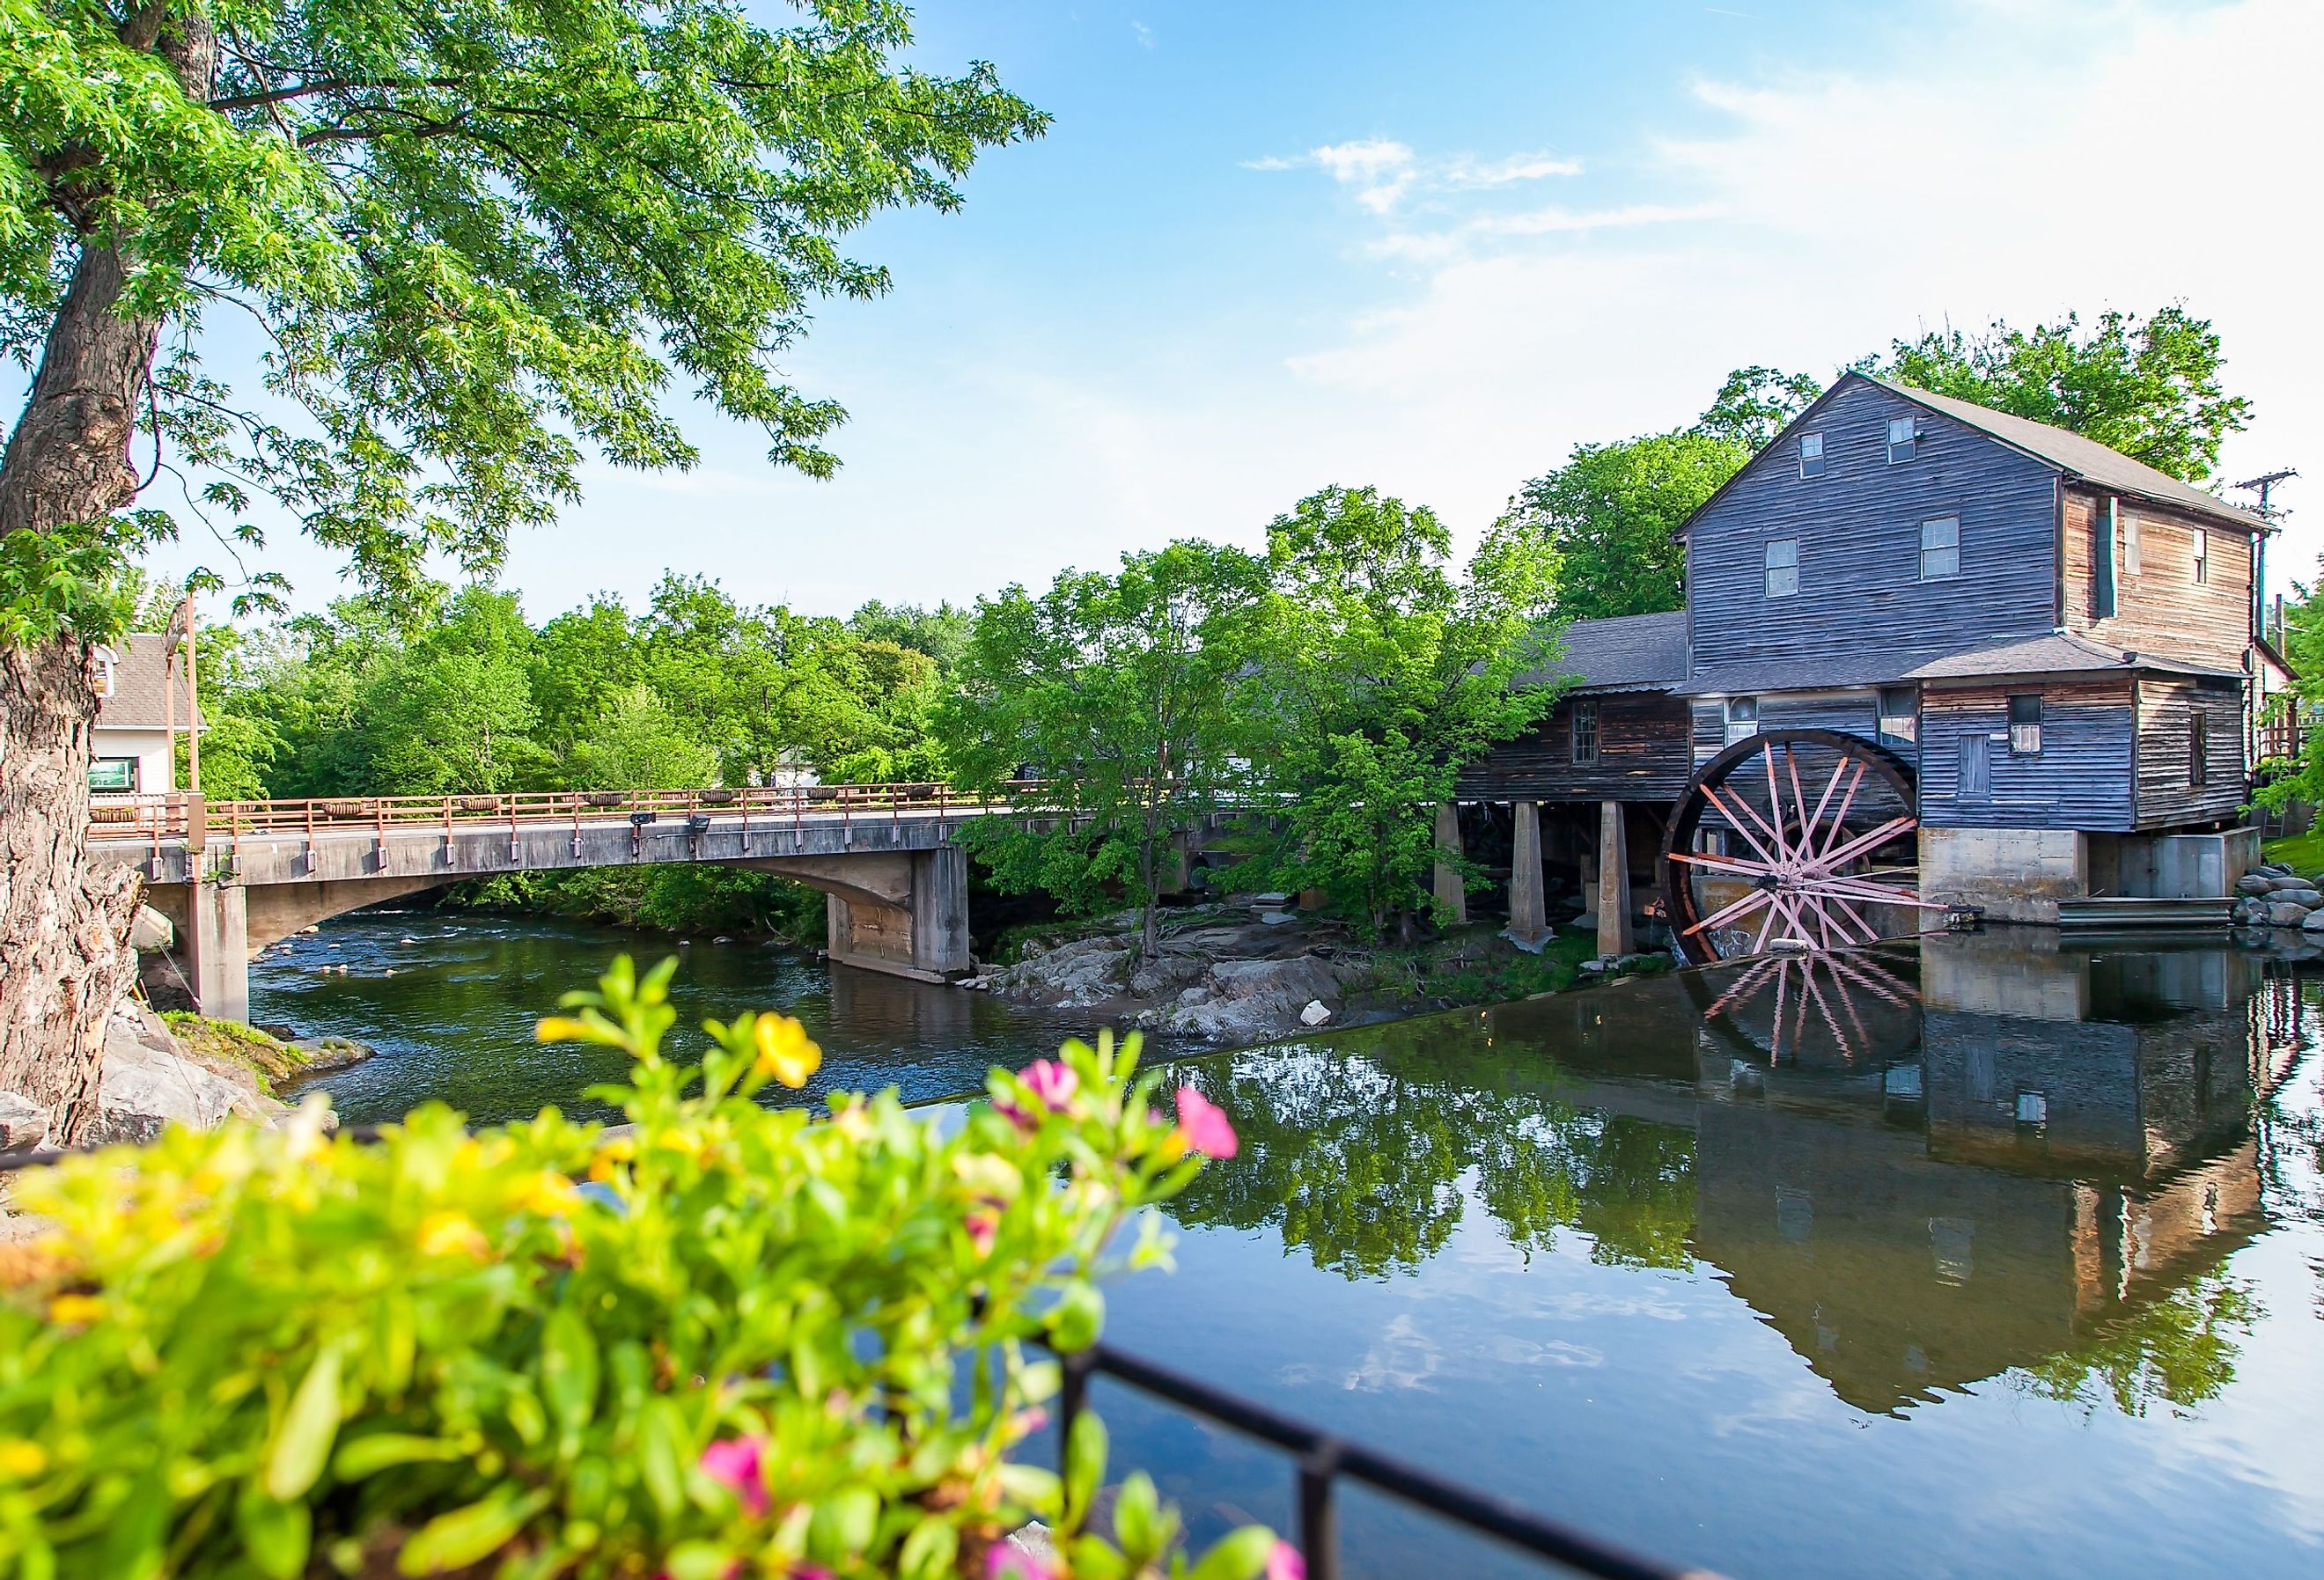 Flowers blooming at the Old Mill in Pigeon Forge, Tennessee.